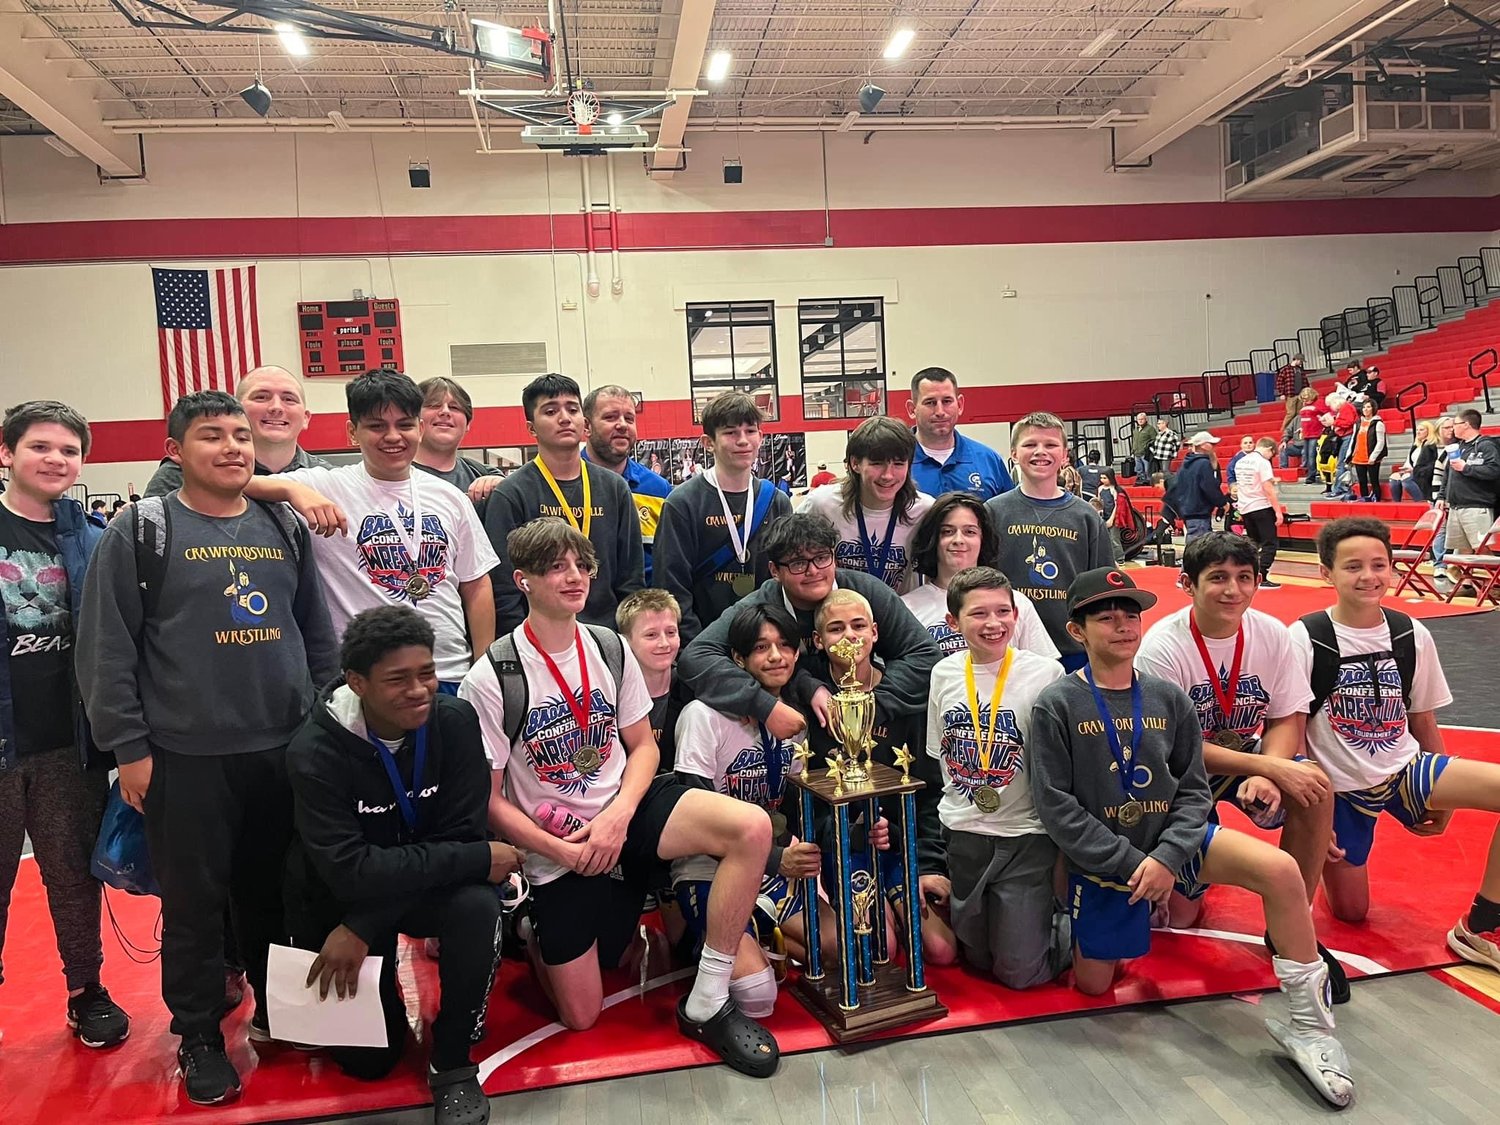 The Crawfordsville Middle School wrestling team capped off their season by capturing the first Sagamore Conference Championship in school history. The team also won the county title for the first time in 18 years.